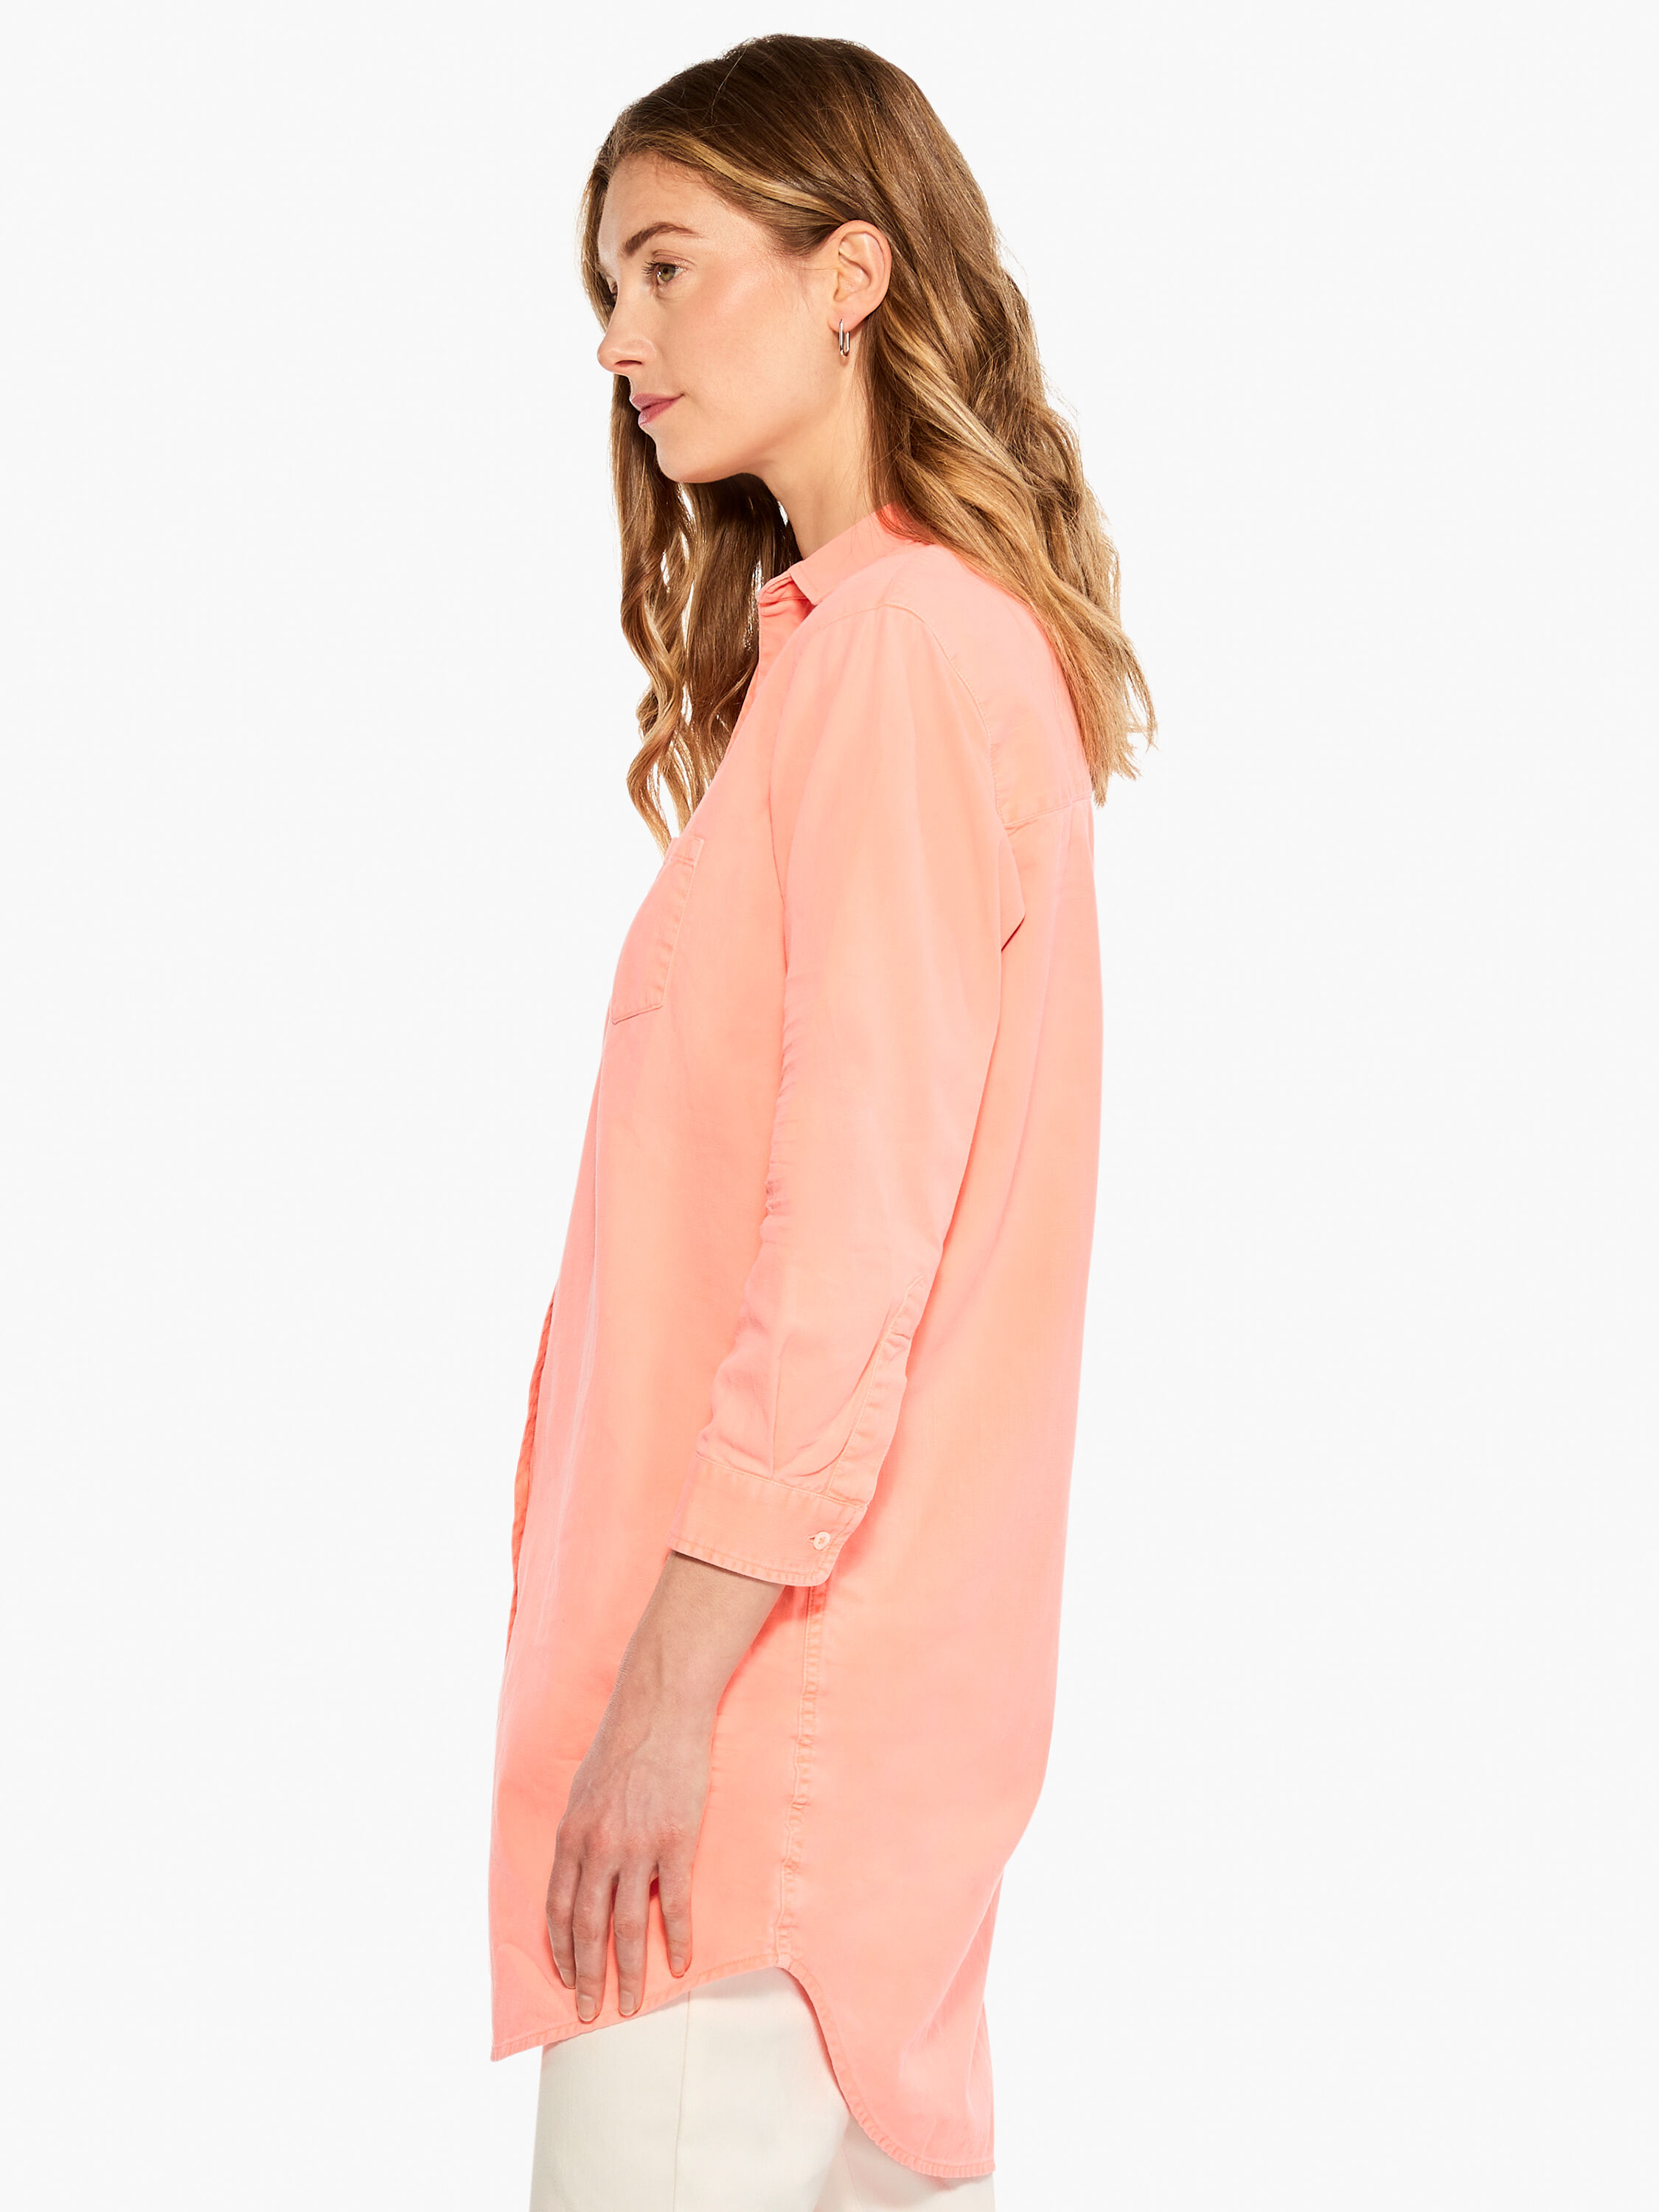 Shop The NIC+ZOE Outlet Deals Including Women's Designer Sweaters